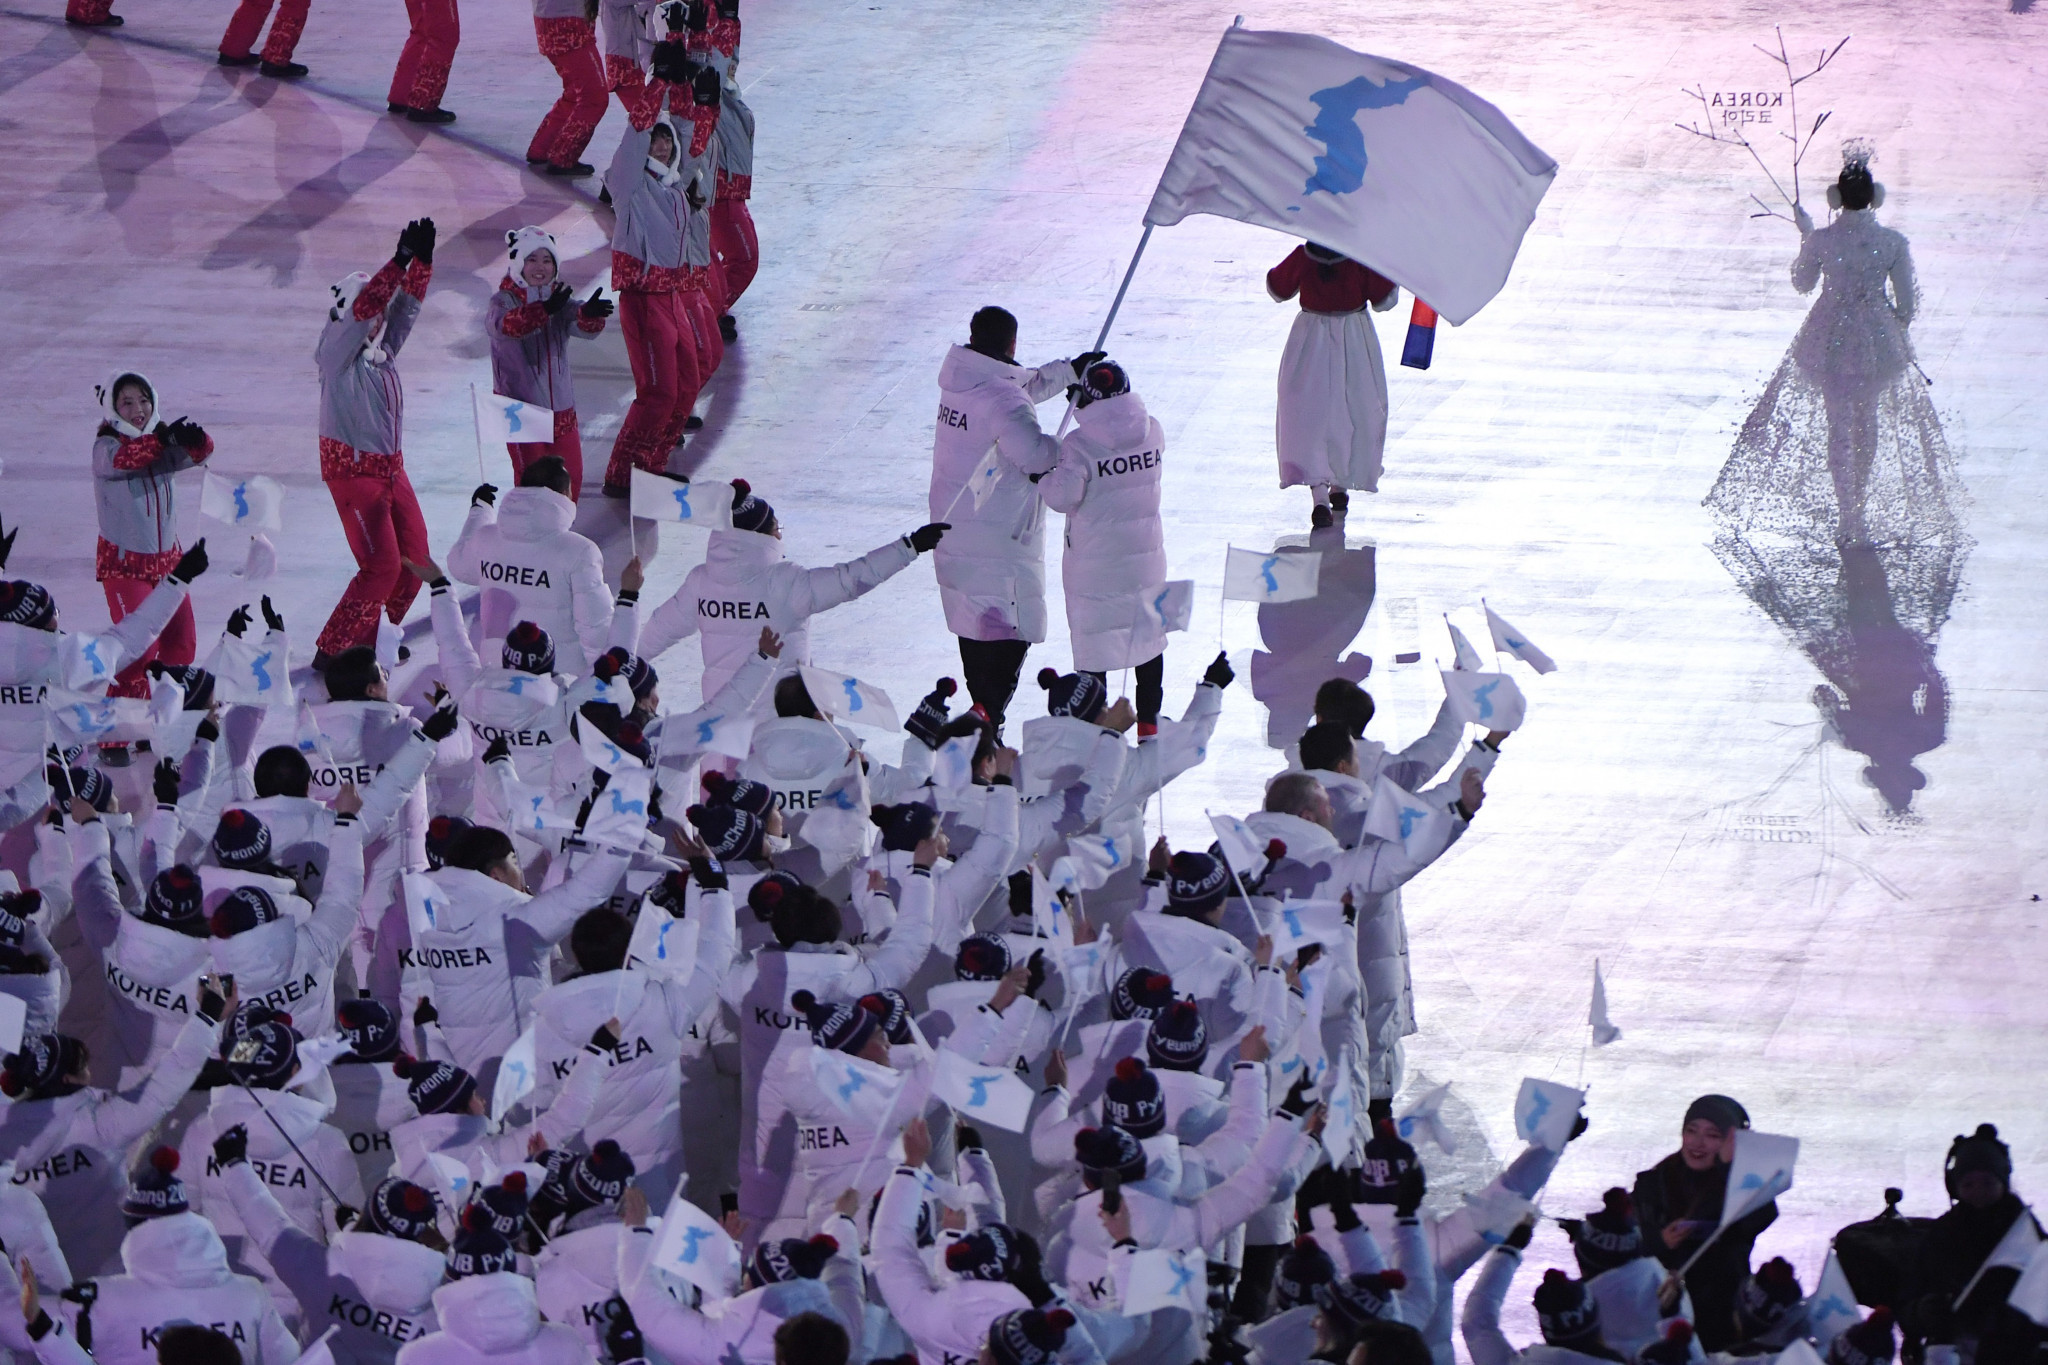 North and South Korea athletes pictured marching together under the unified flag at the Opening Ceremony of Pyeongchang 2018 ©Getty Images